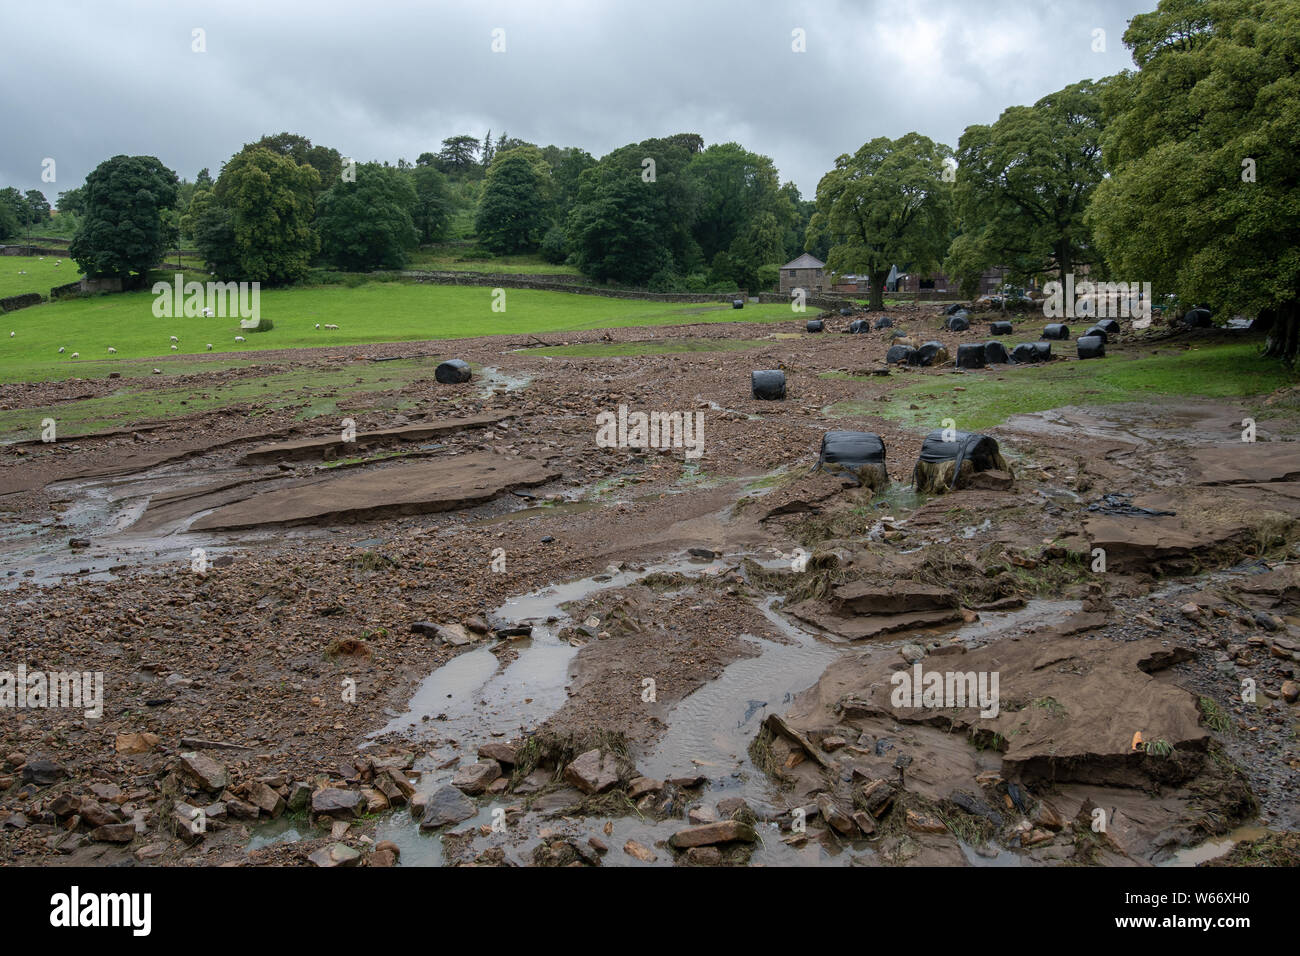 Arkengarthdale, North Yorkshire, UK. 31st July 2019.Douglas Barninghams farm in Arkengarthdale was left a scene of devastation after the flash flood which ripped through Swaledale yesterday. Over 300 bales of silage were swept away and around 200 sheep are still missing, also presumed to be swept away. Credit: Wayne HUTCHINSON/Alamy Live News Stock Photo